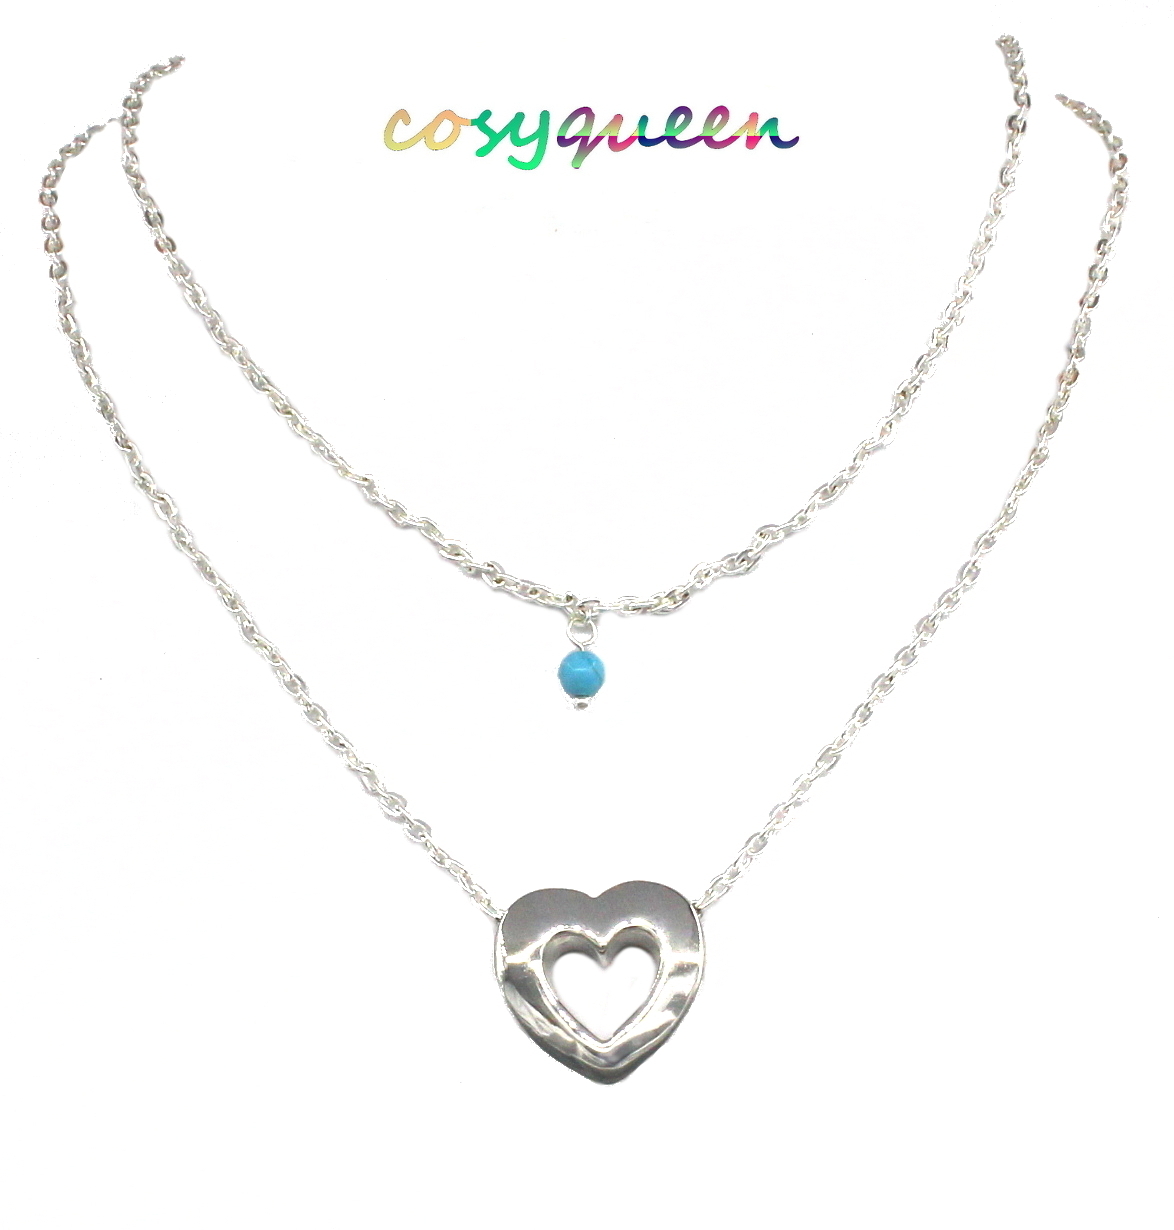 Fabulous new turquoise blue gemstone silver love heart pendant chain necklace - $9,999.00